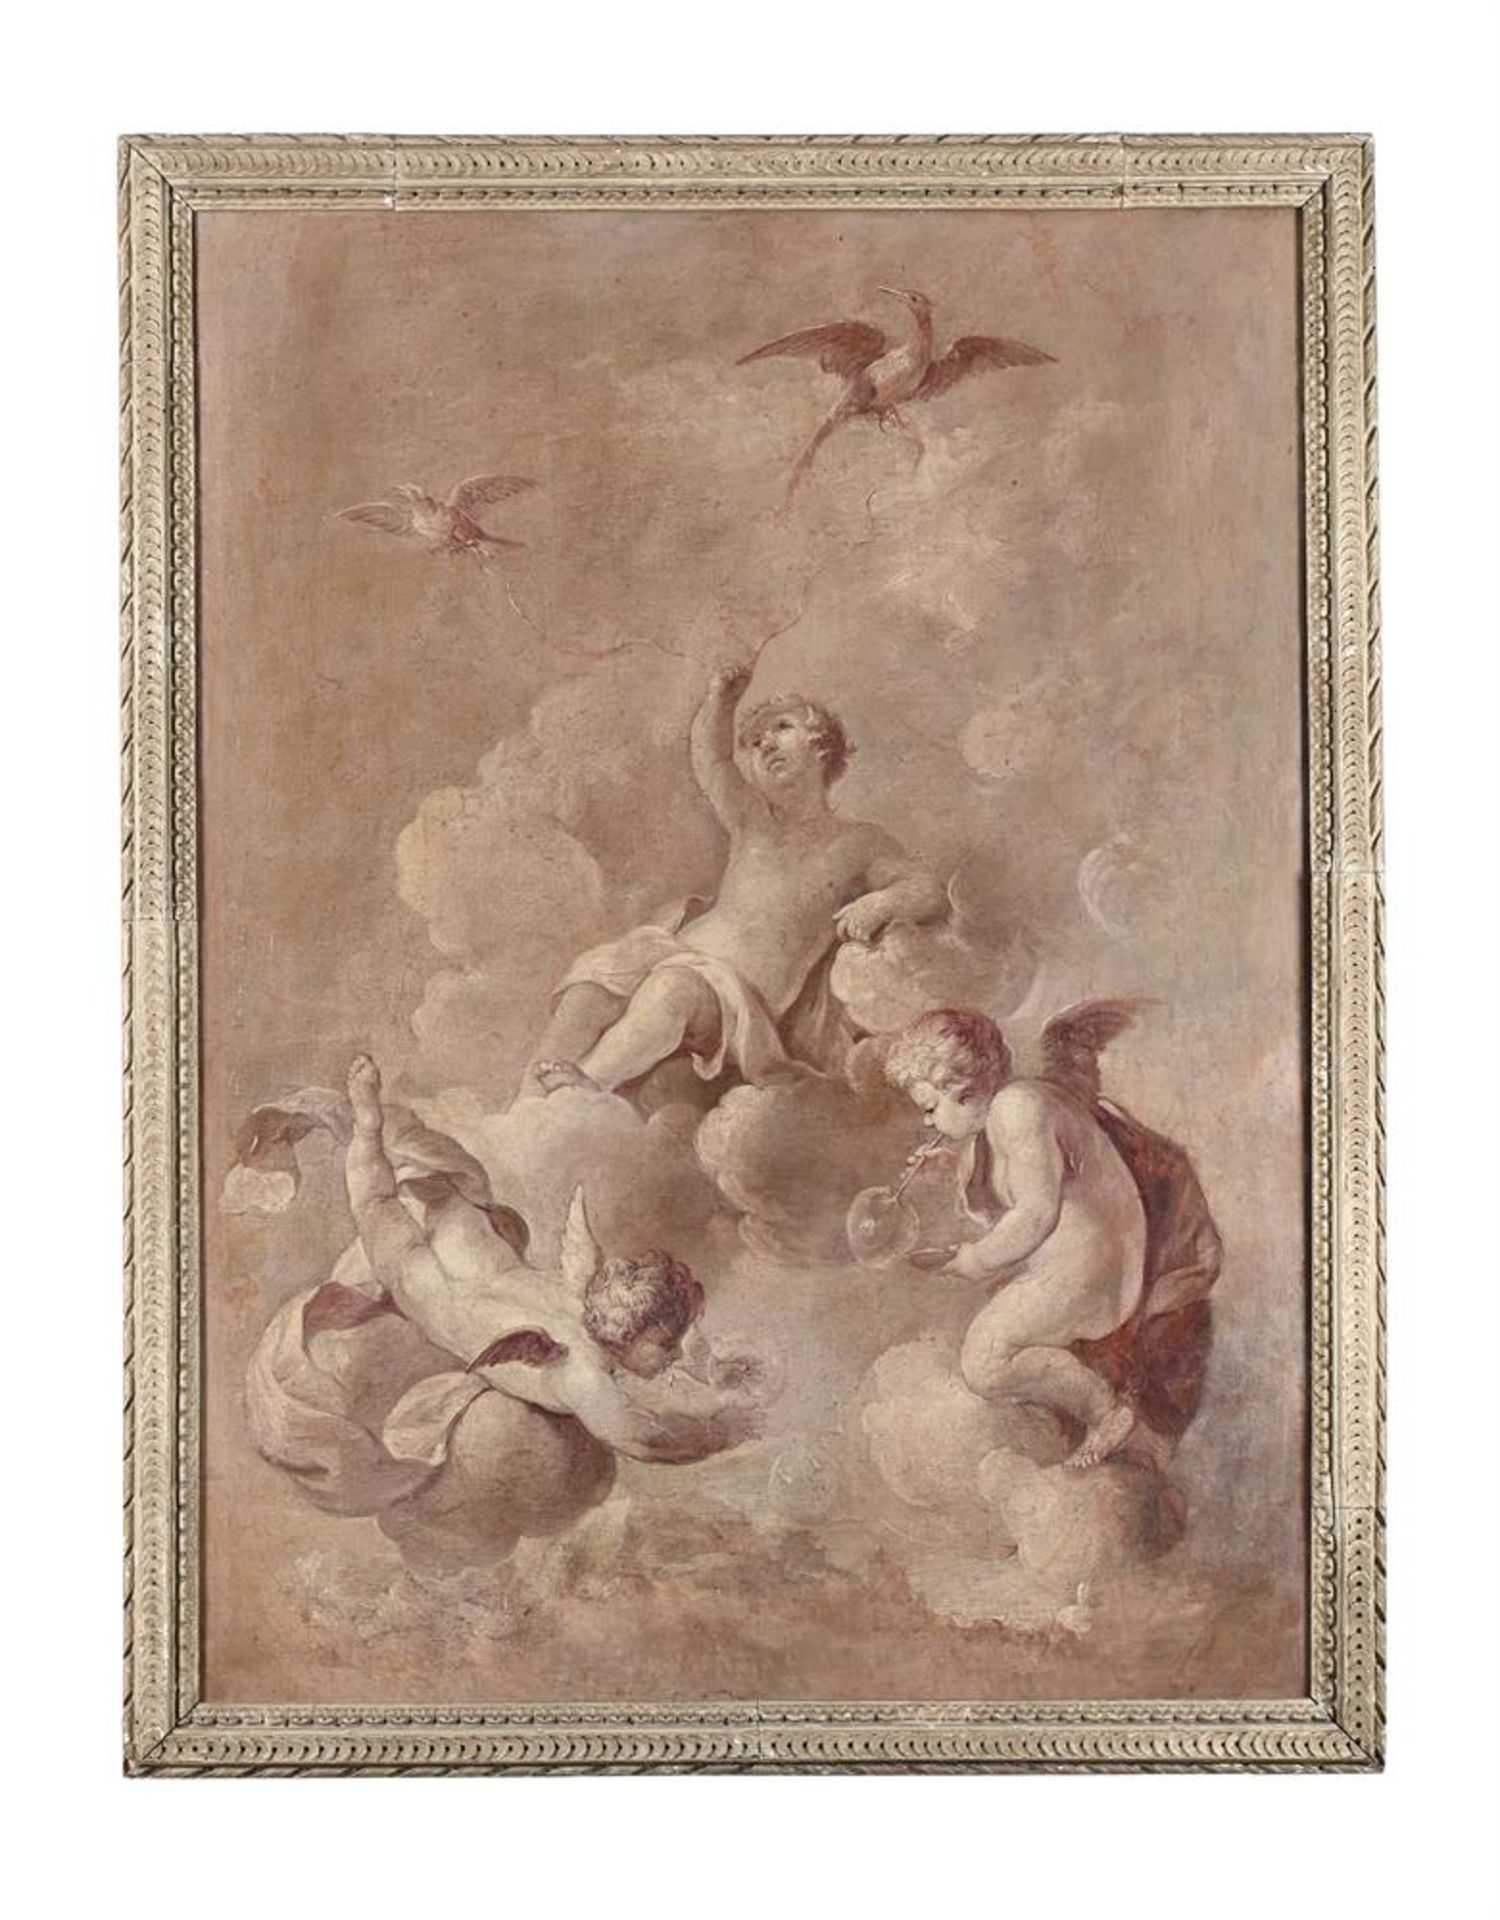 FOLLOWER OF JACOB DE WITT, PUTTI EMBLEMATIC OF THE FOUR CLASSICAL ELEMENTS - Image 8 of 13